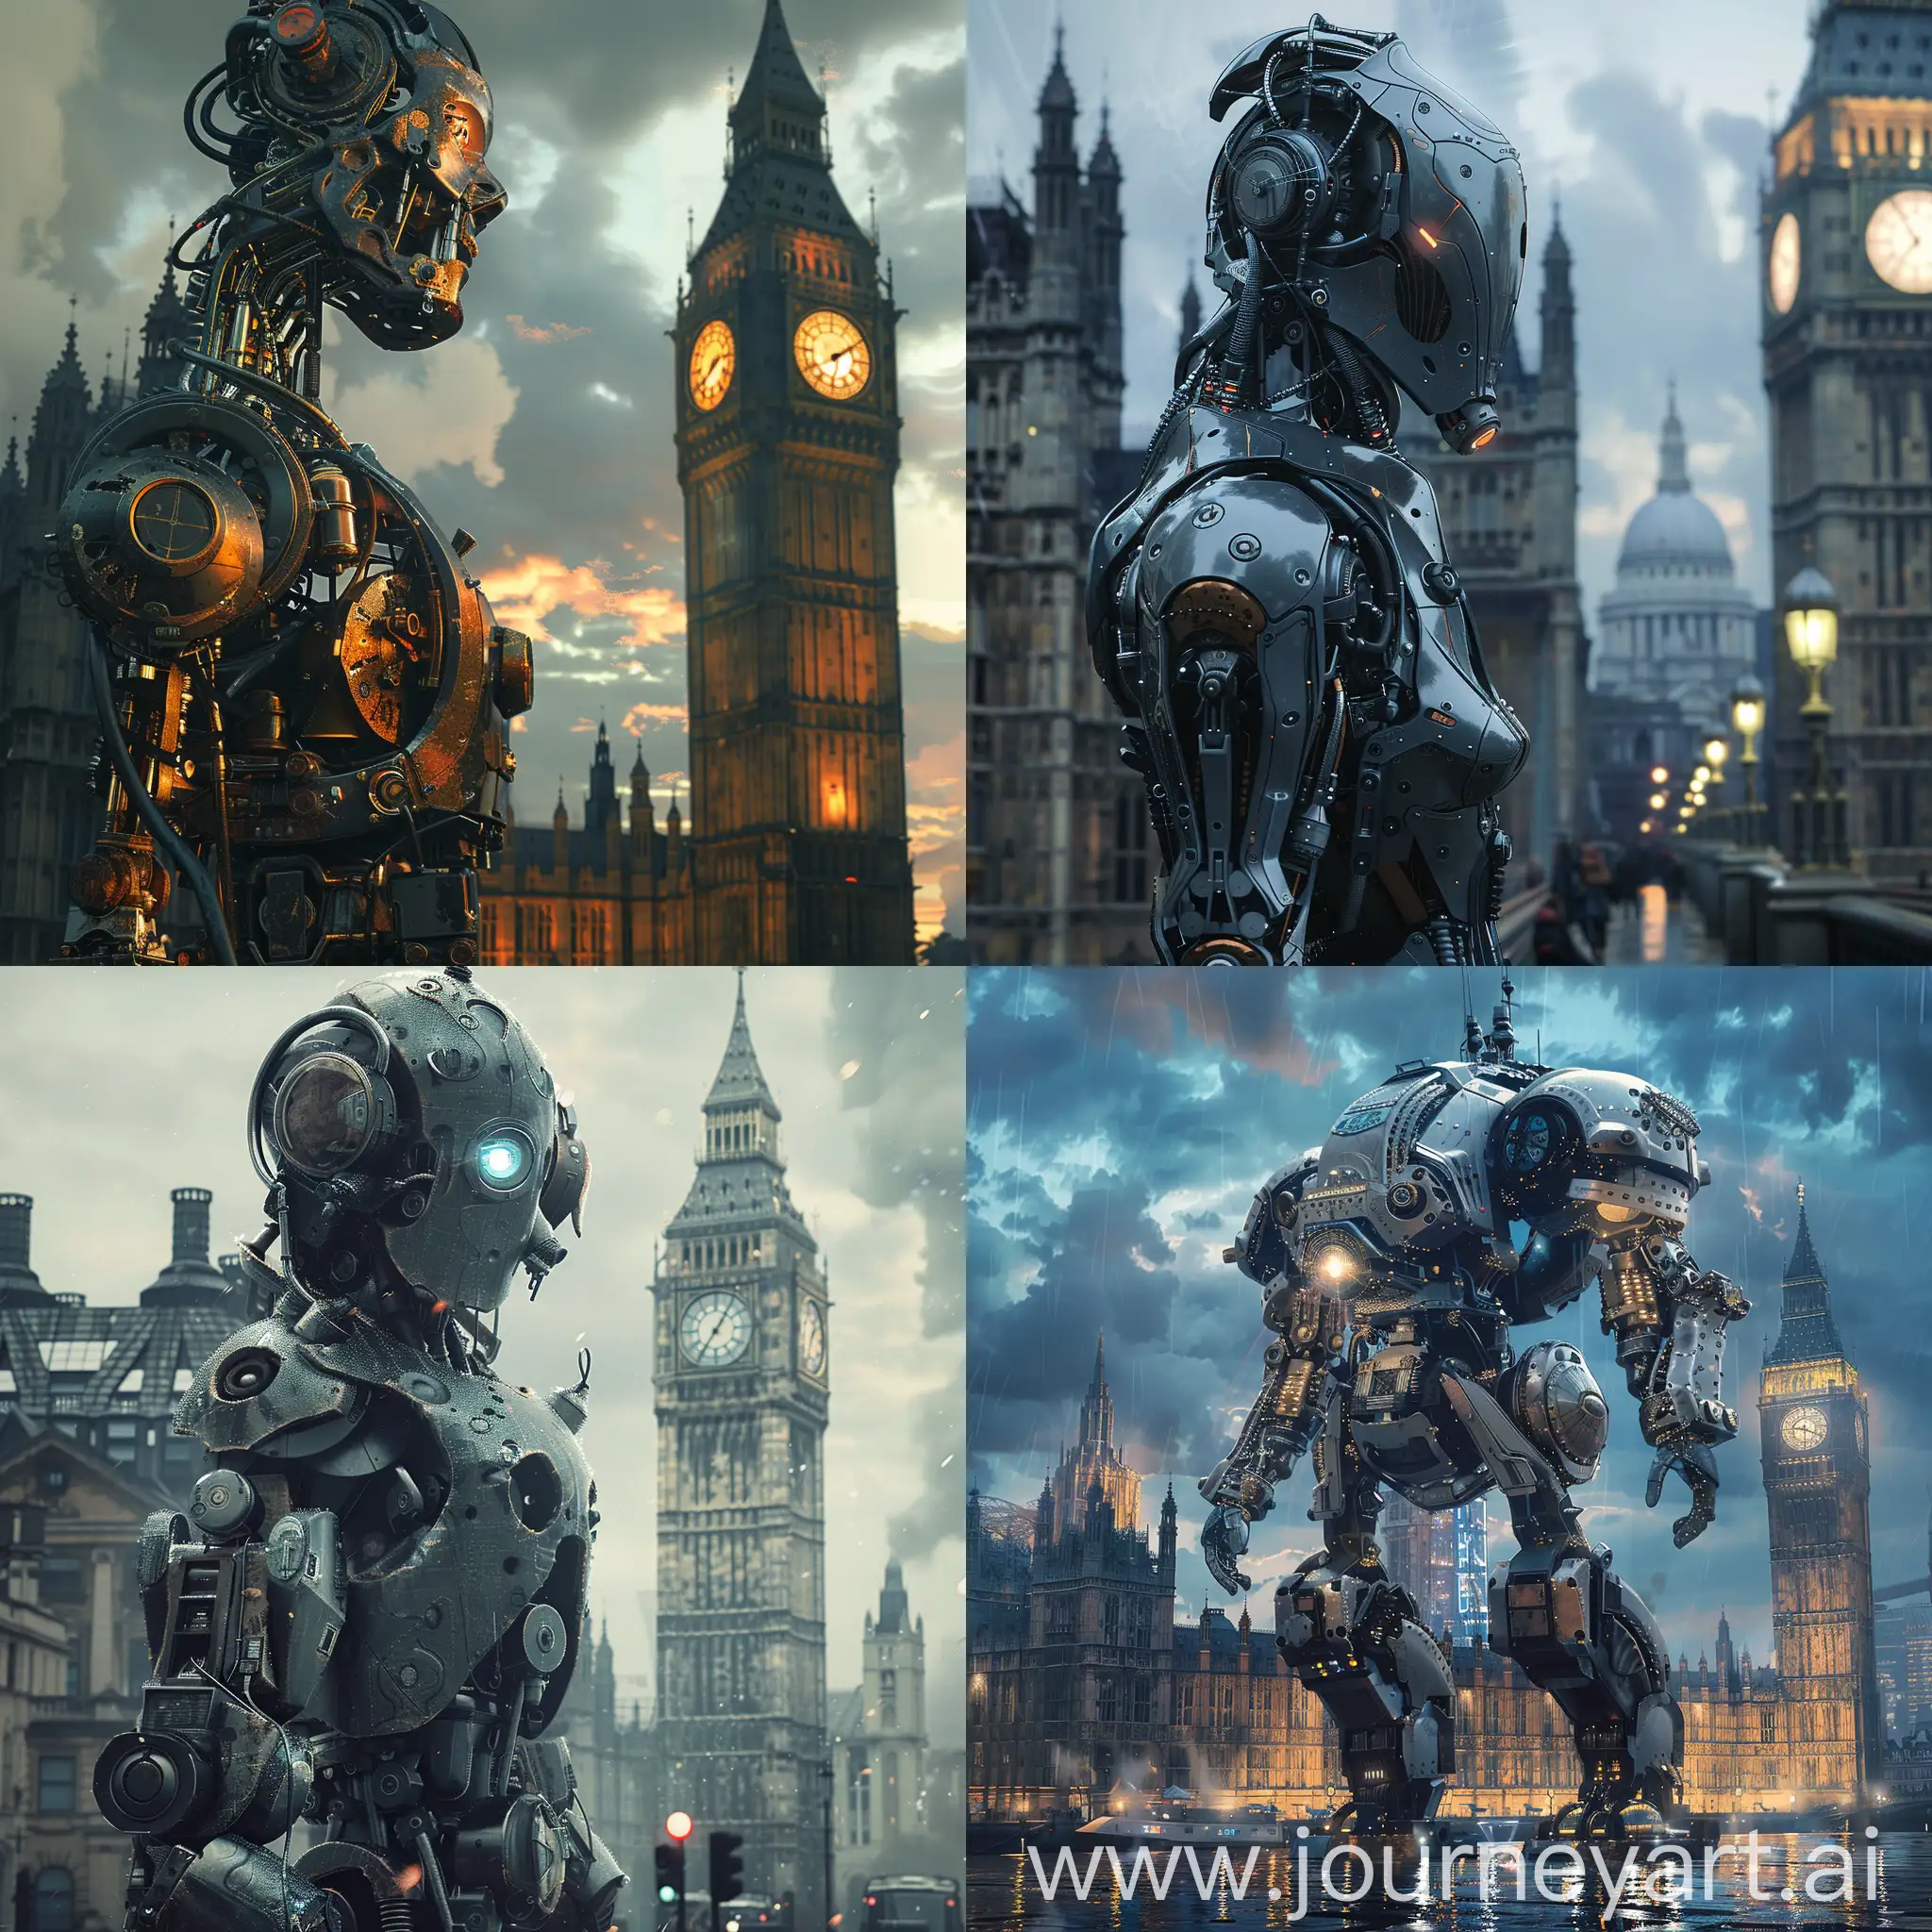 A highly detailed image of a beautiful steampunk robot in futuristic dystopian London. Beautiful magical mysterious fantasy surreal highly detailed